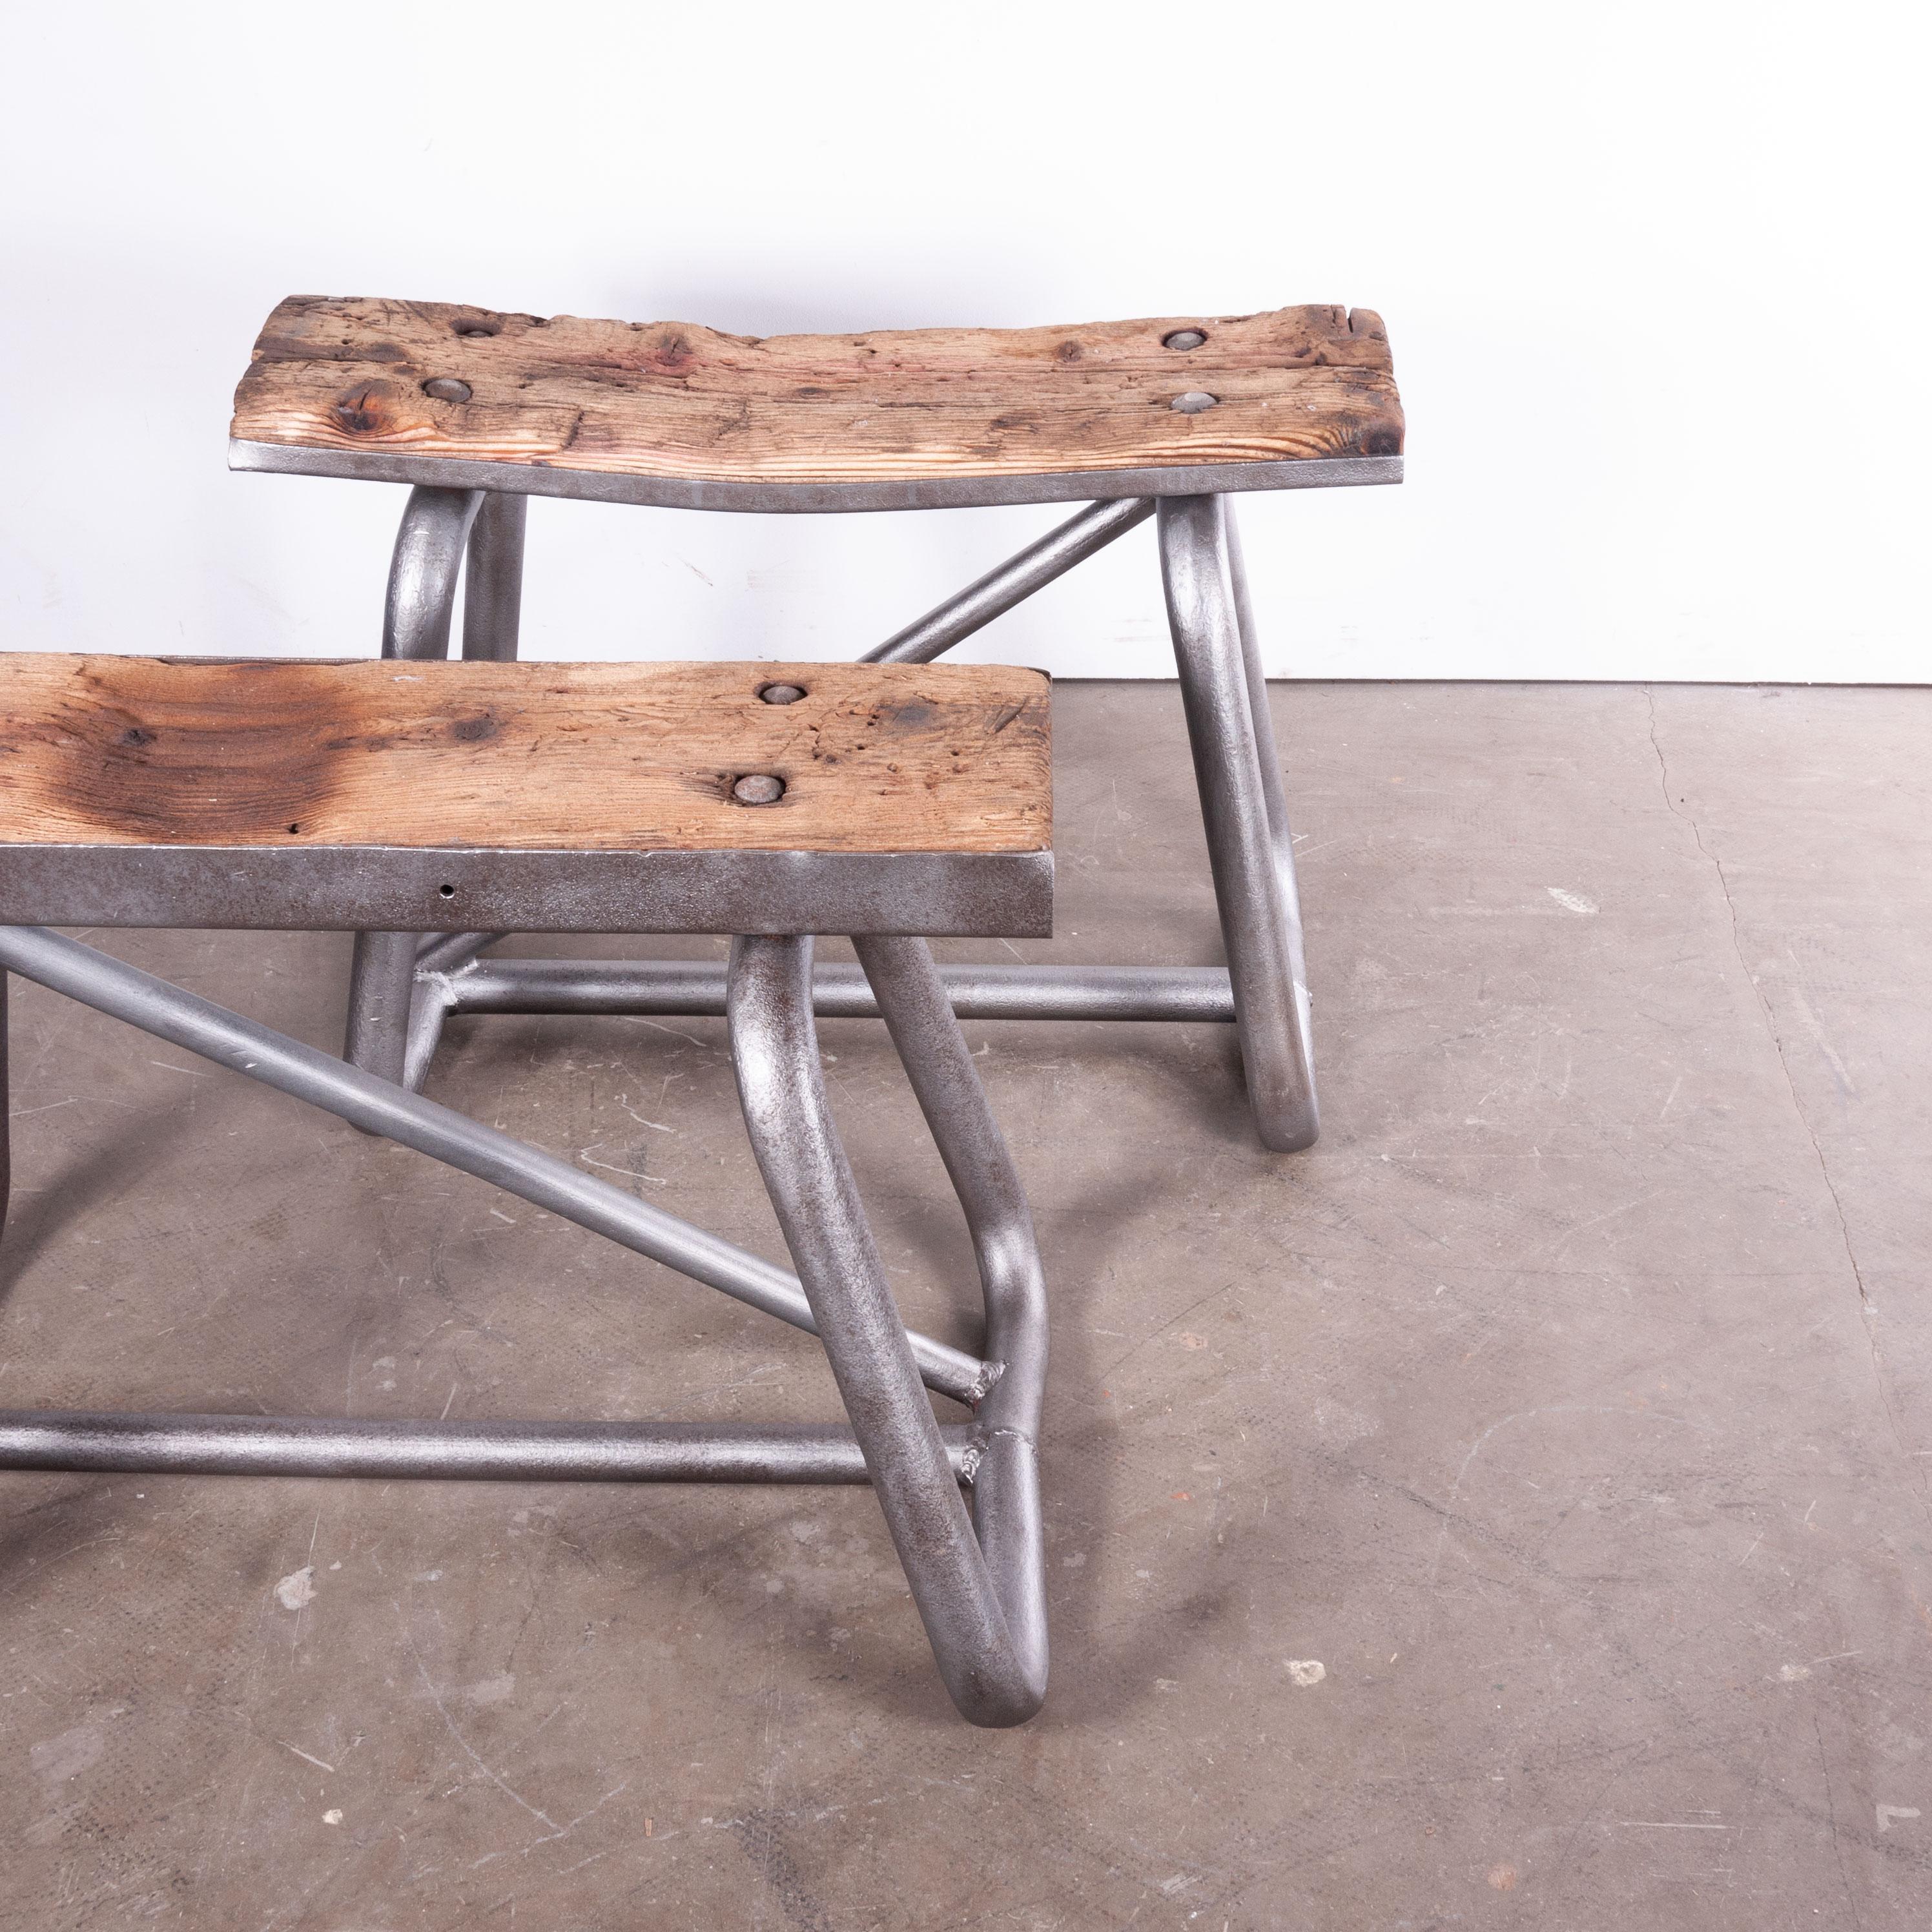 1960s pair of industrial metal and wood trestles/stools/side tables
1960s vintage pair of industrial metal and wood trestles/stools/side tables. Extremely robust industrial steel trestles. We sourced these from a foundry outside of Manchester. They